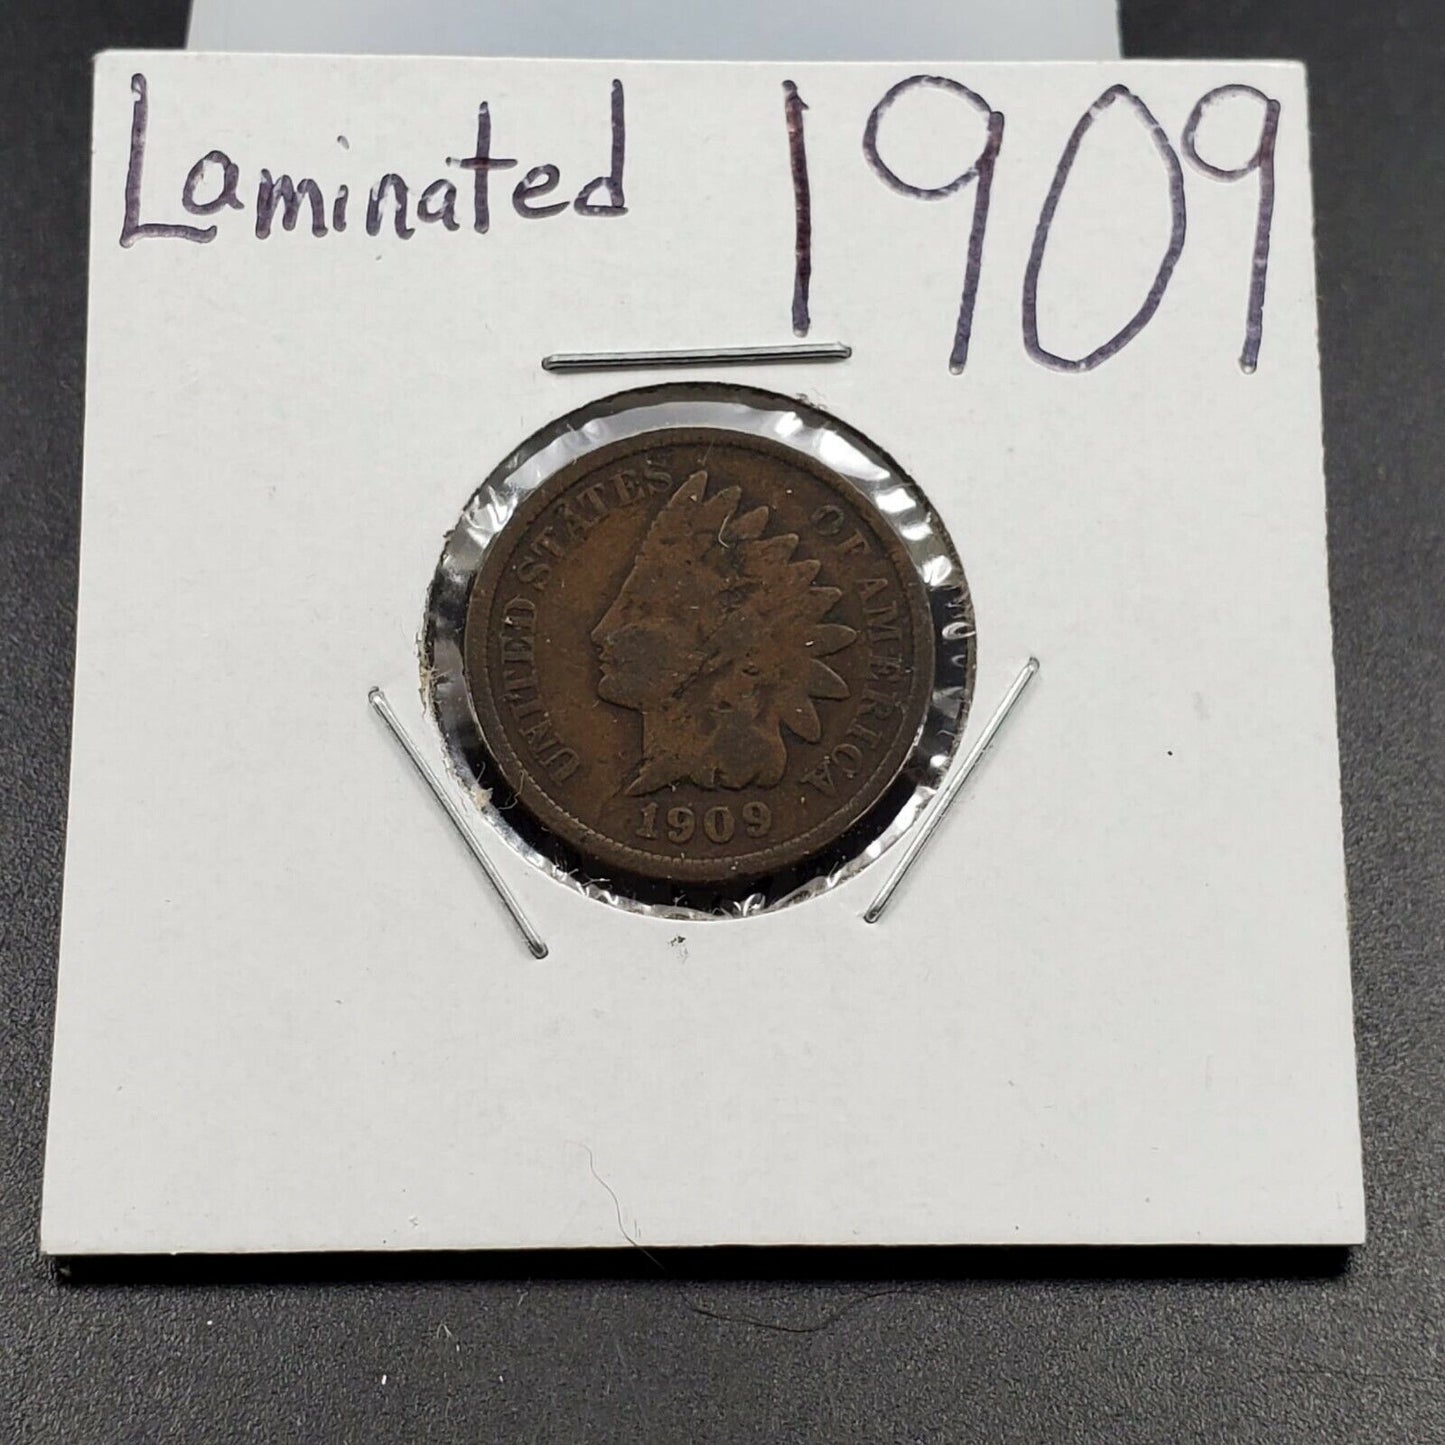 1909 Indian Head Cent Penny Coin Circulated Laminated Planchet 7 oclock Obverse